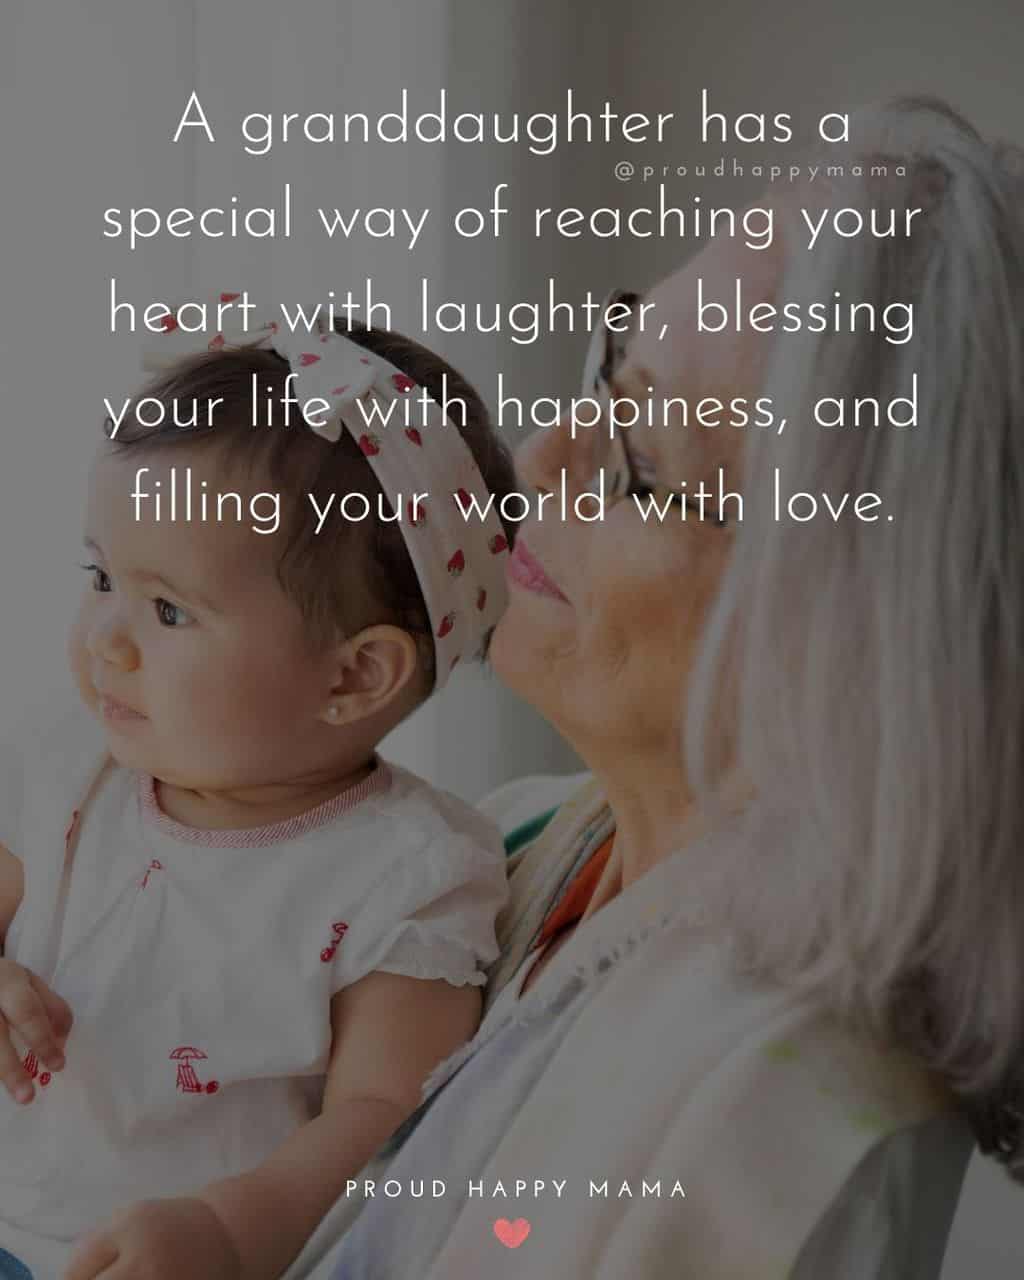 Granddaughter Quotes - A granddaughter has a special way of reaching your heart with laughter, blessing your life with